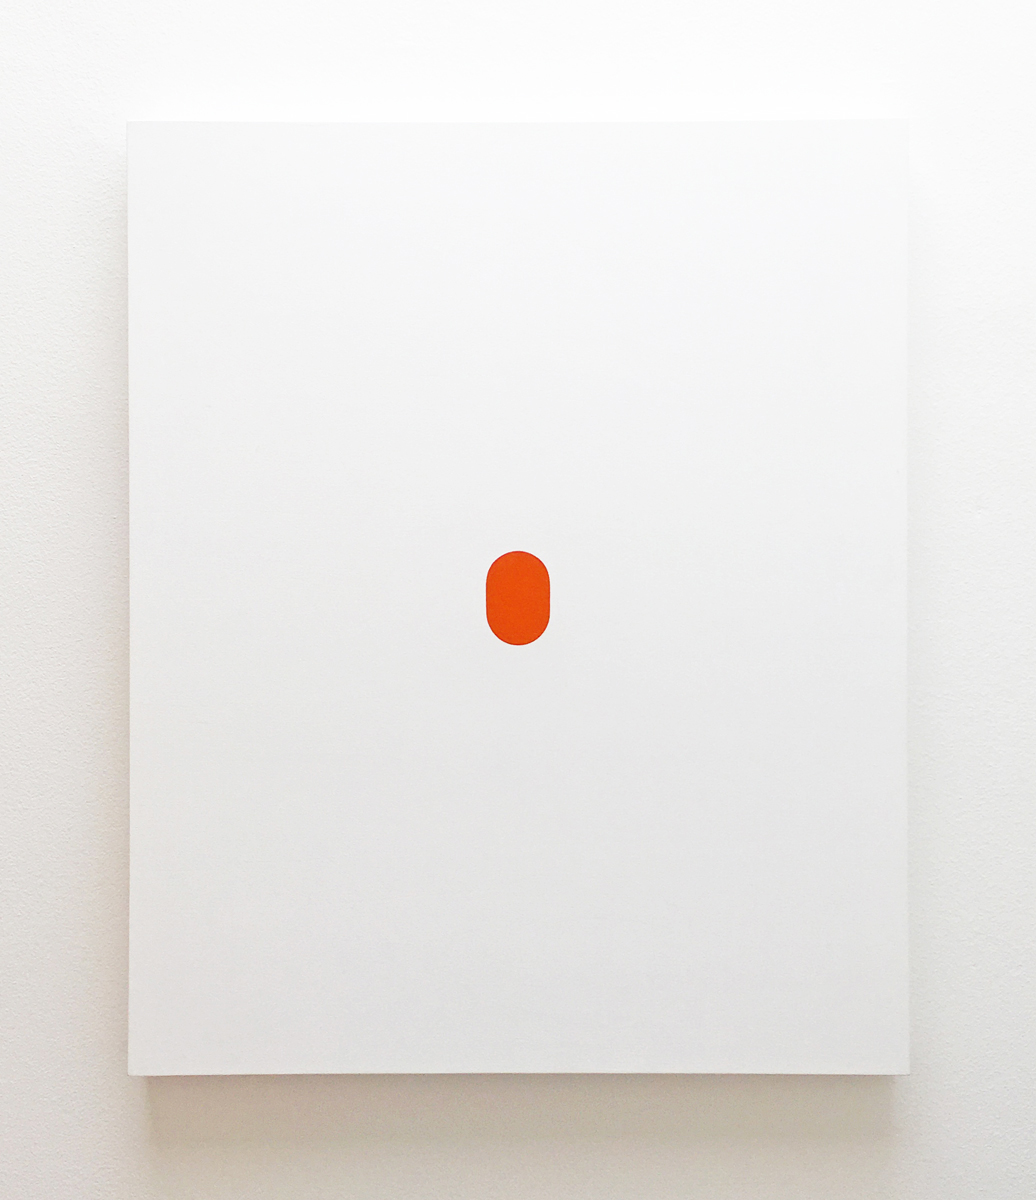 A small orange oval centered on a rectangular white background on panel.